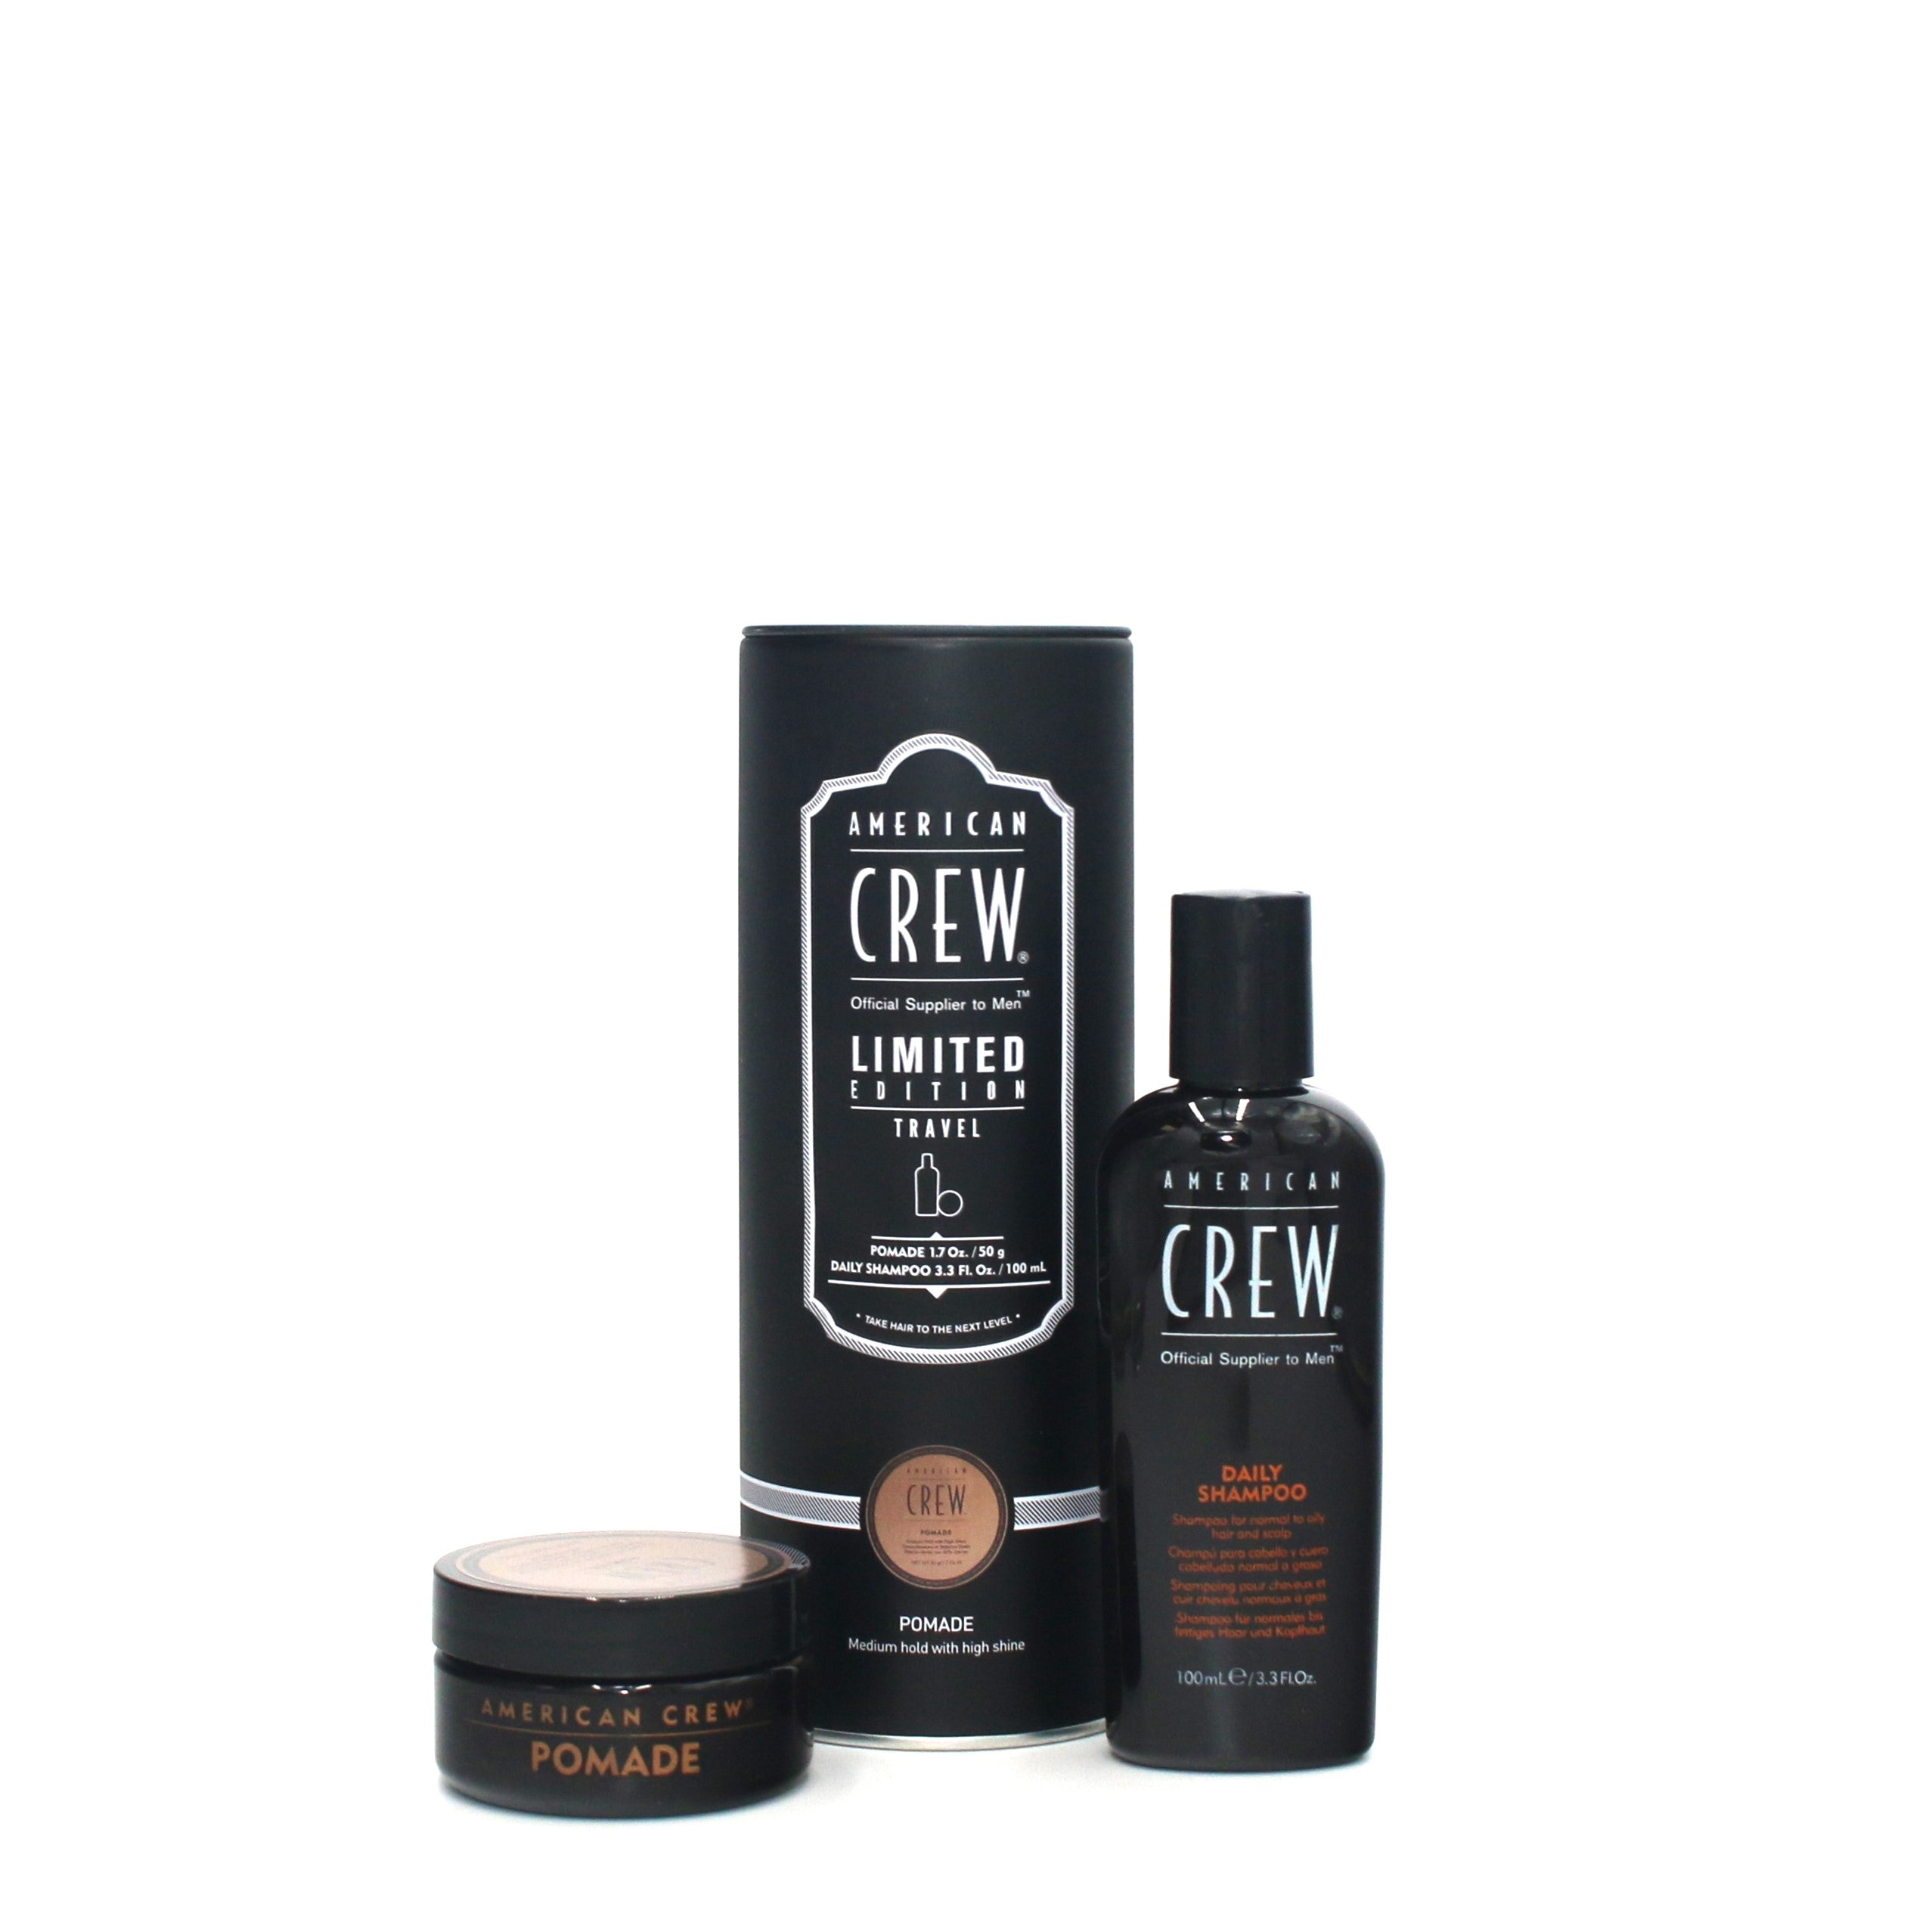 AMERICAN CREW Official Supplier to Men Travel Pomade 1.7 oz Sham – Overstock Beauty Supply